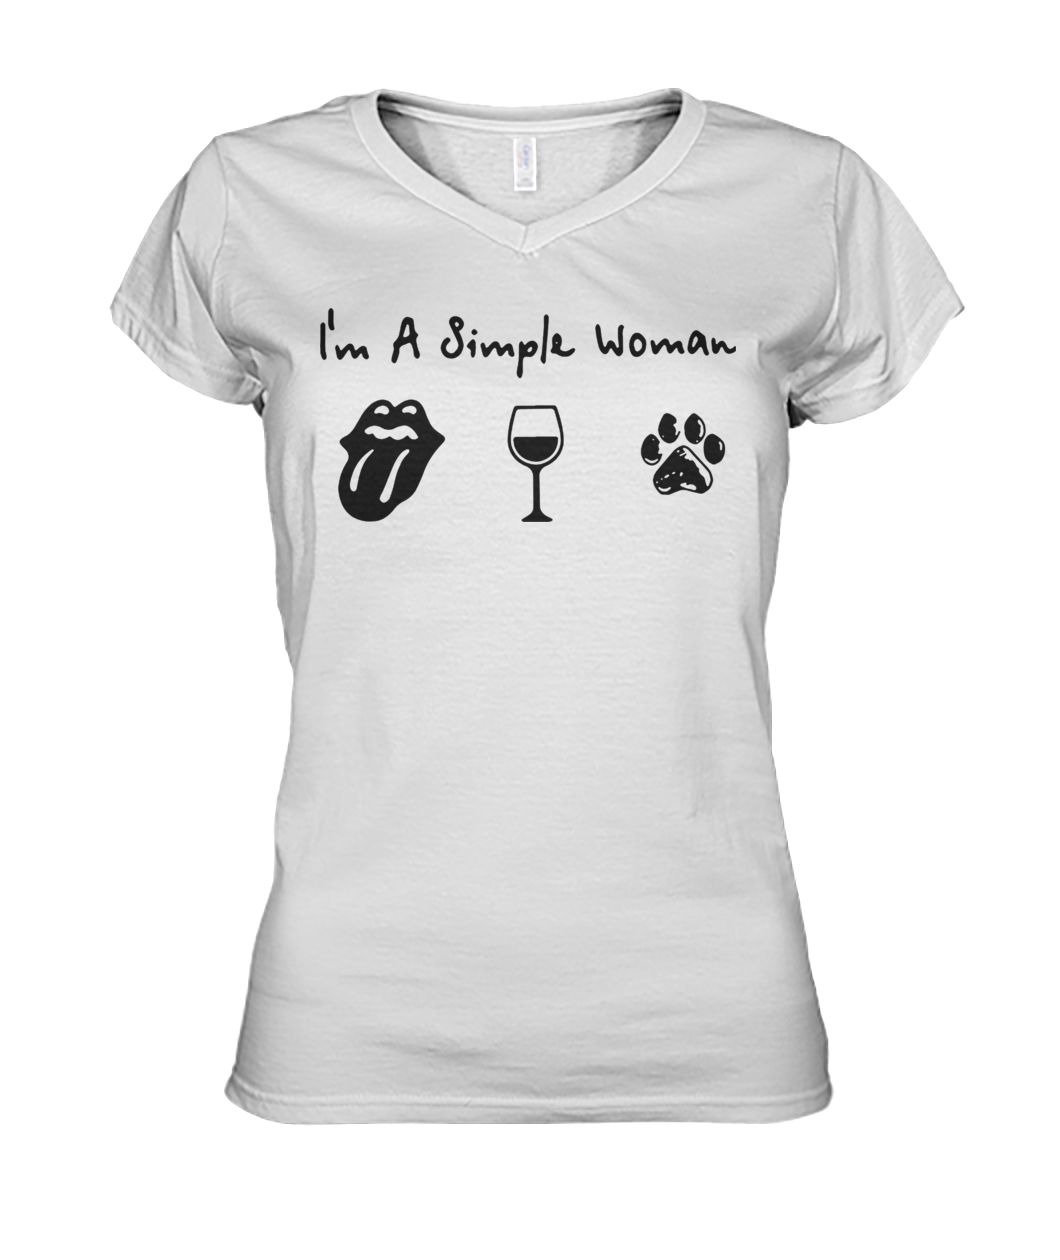 I'm a simple woman I love Cardi B wine and dog women's v-neck